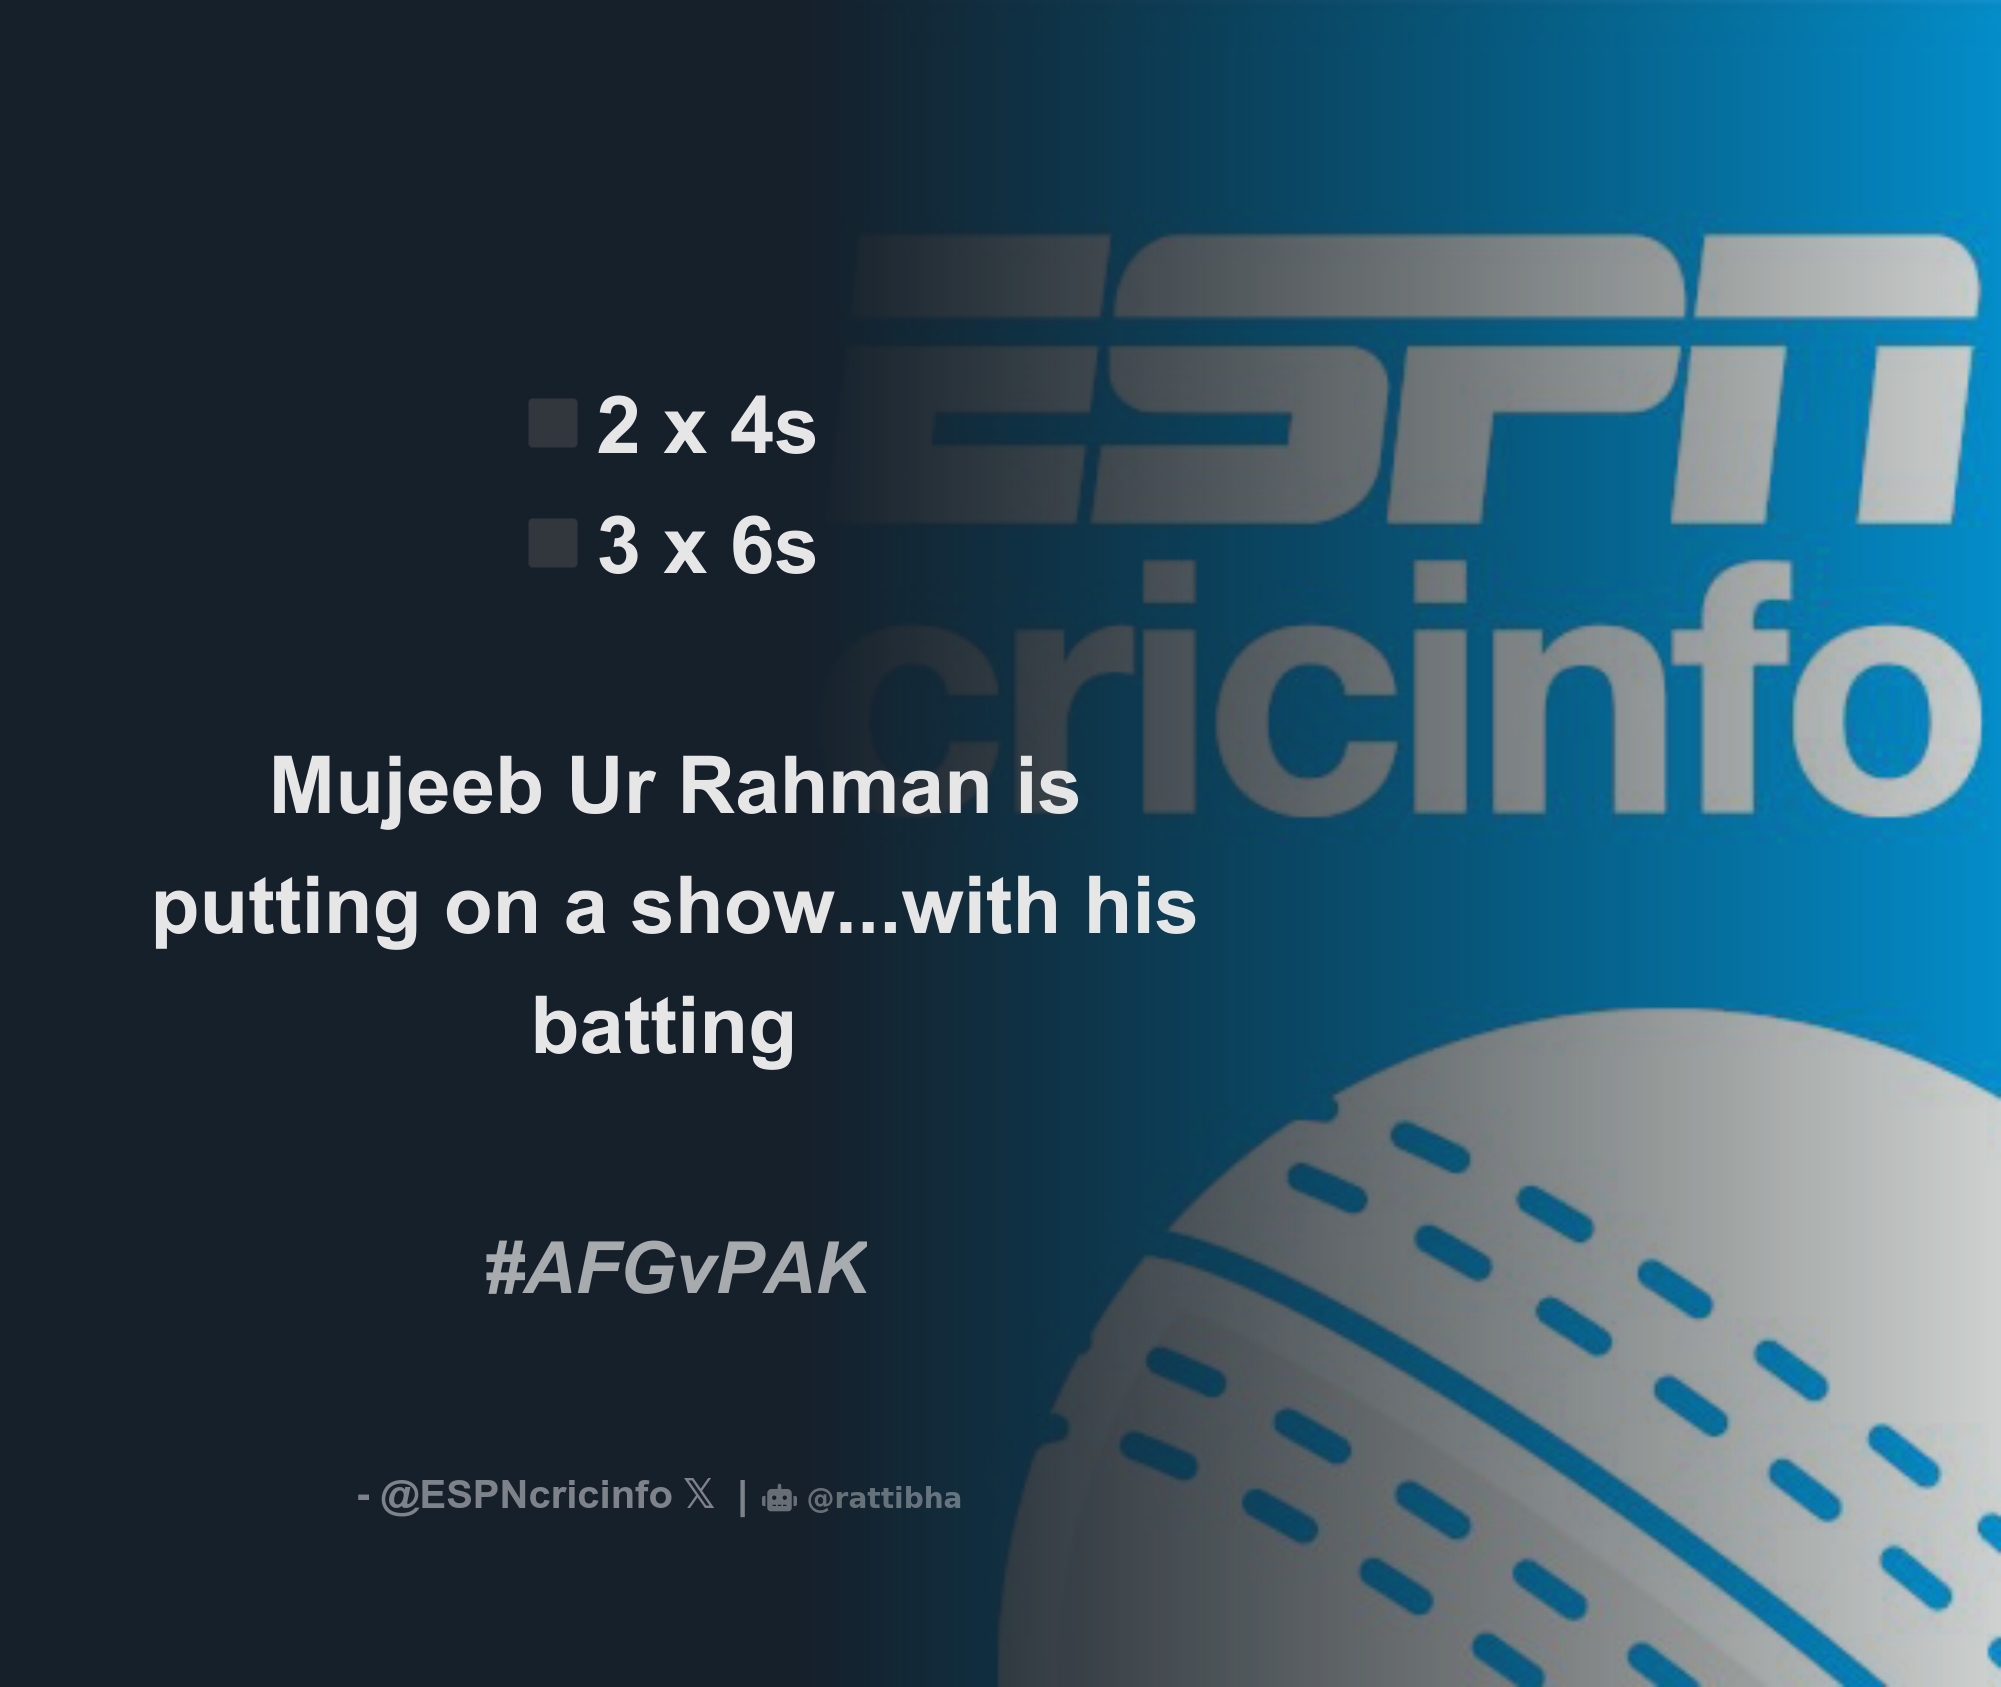 ◾️2 x 4s ◾️3 x 6s Mujeeb Ur Rahman is putting on a show...with his batting #AFGvPAK - Thread from ESPNcricinfoESPNcricinfo